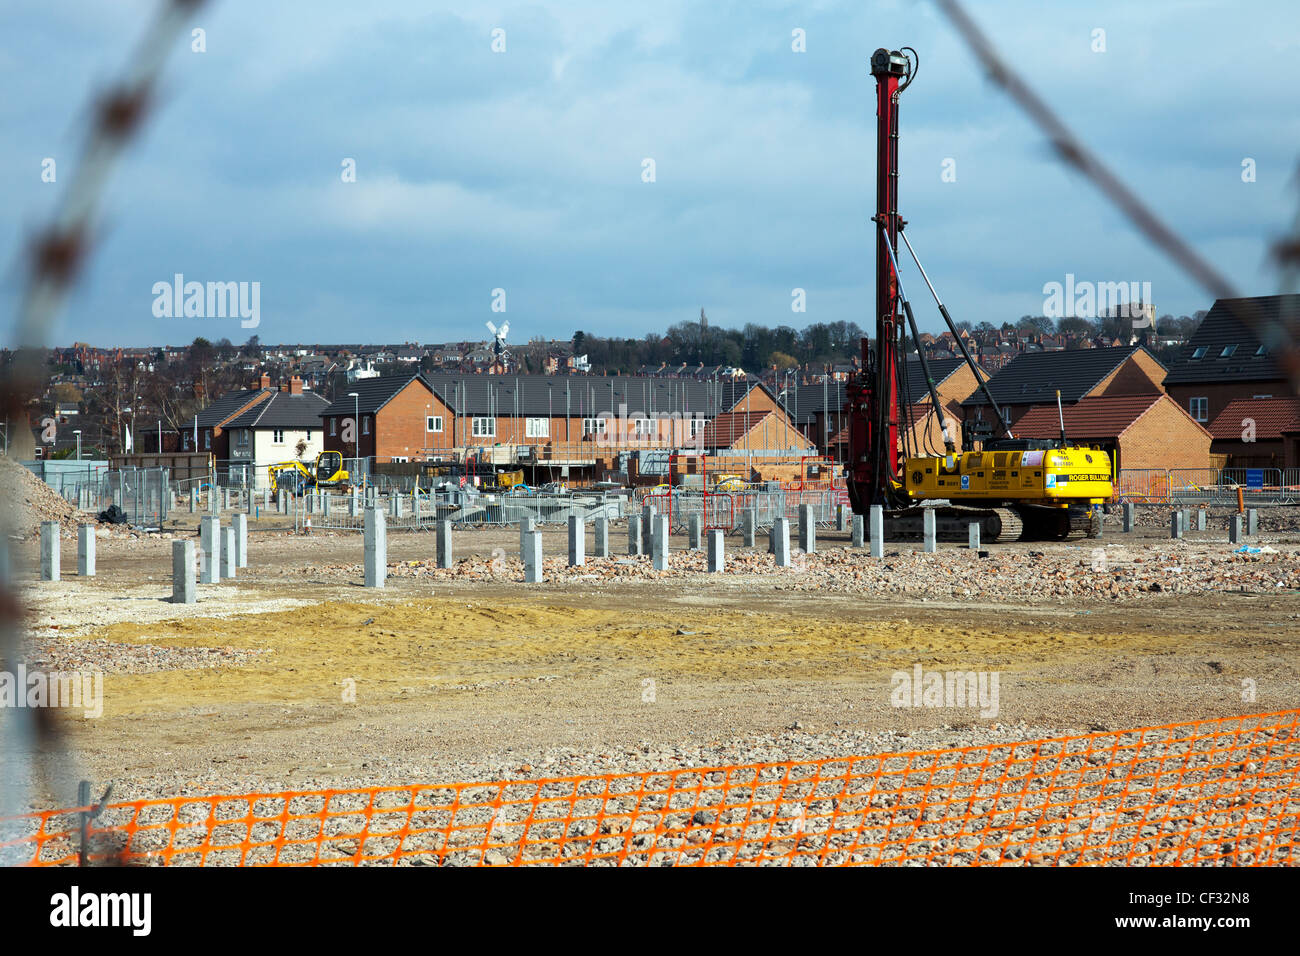 Pile driver on construction site with concrete pillars for stability Stock Photo